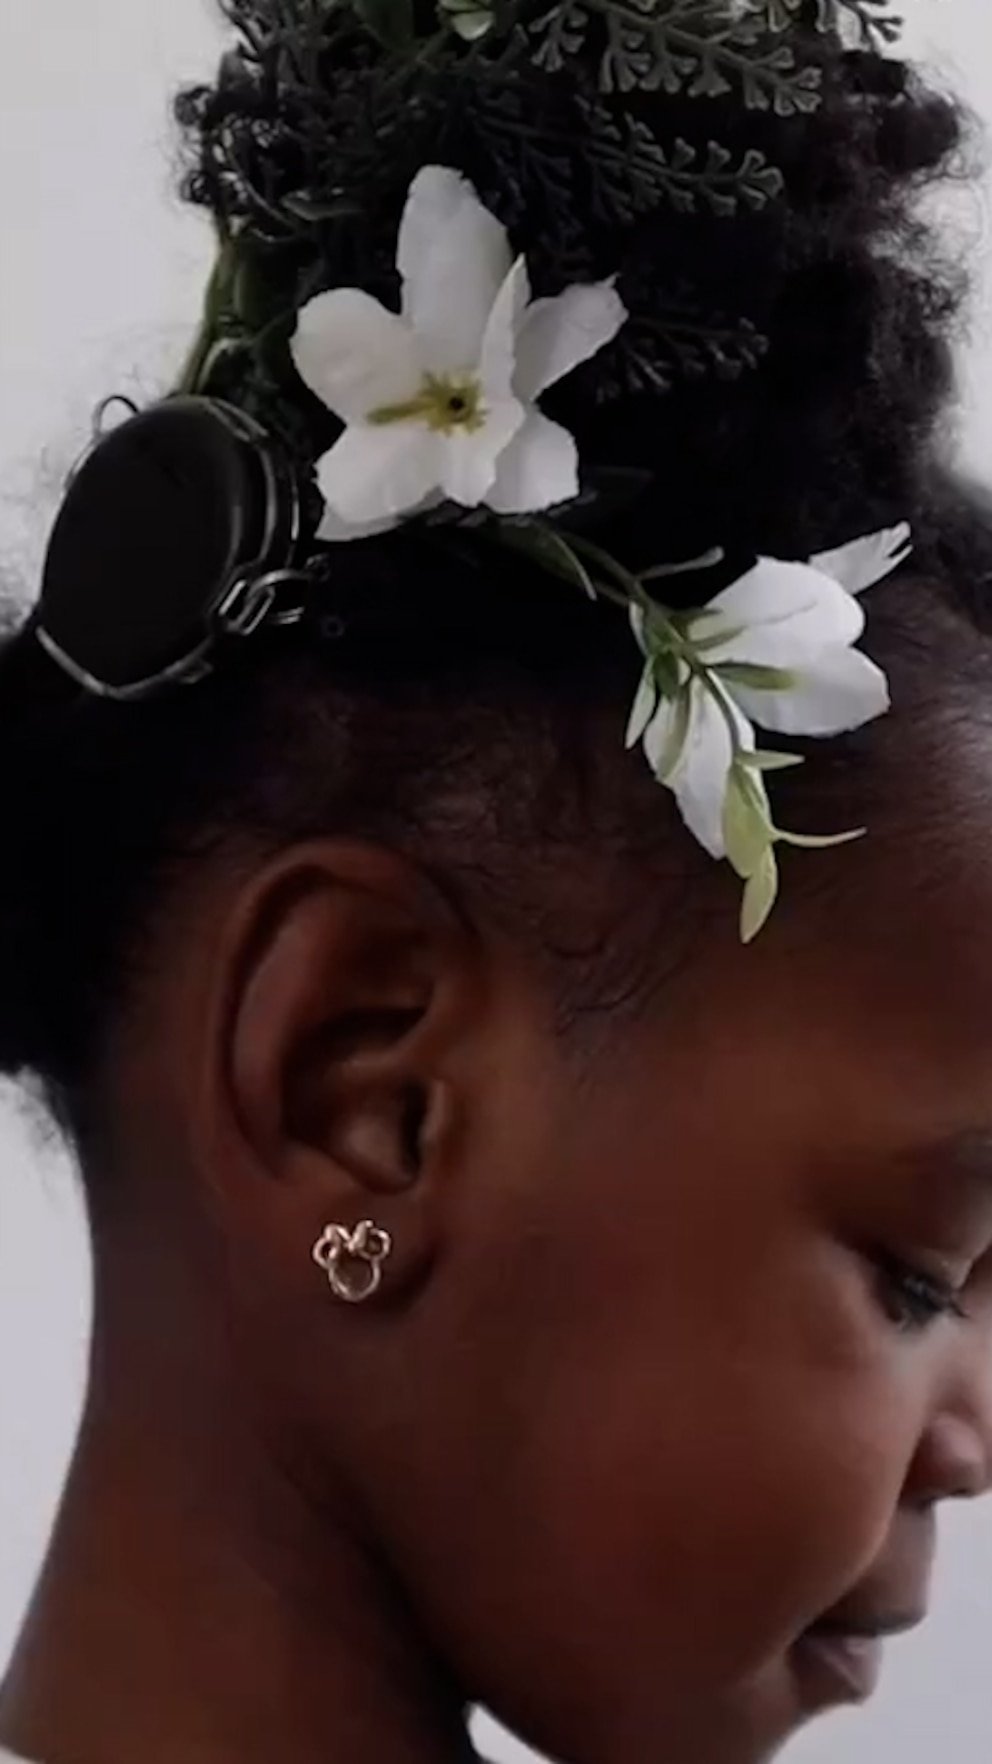 WATCH: Mom's creative hairstyles for deaf daughter's cochlear implant go viral